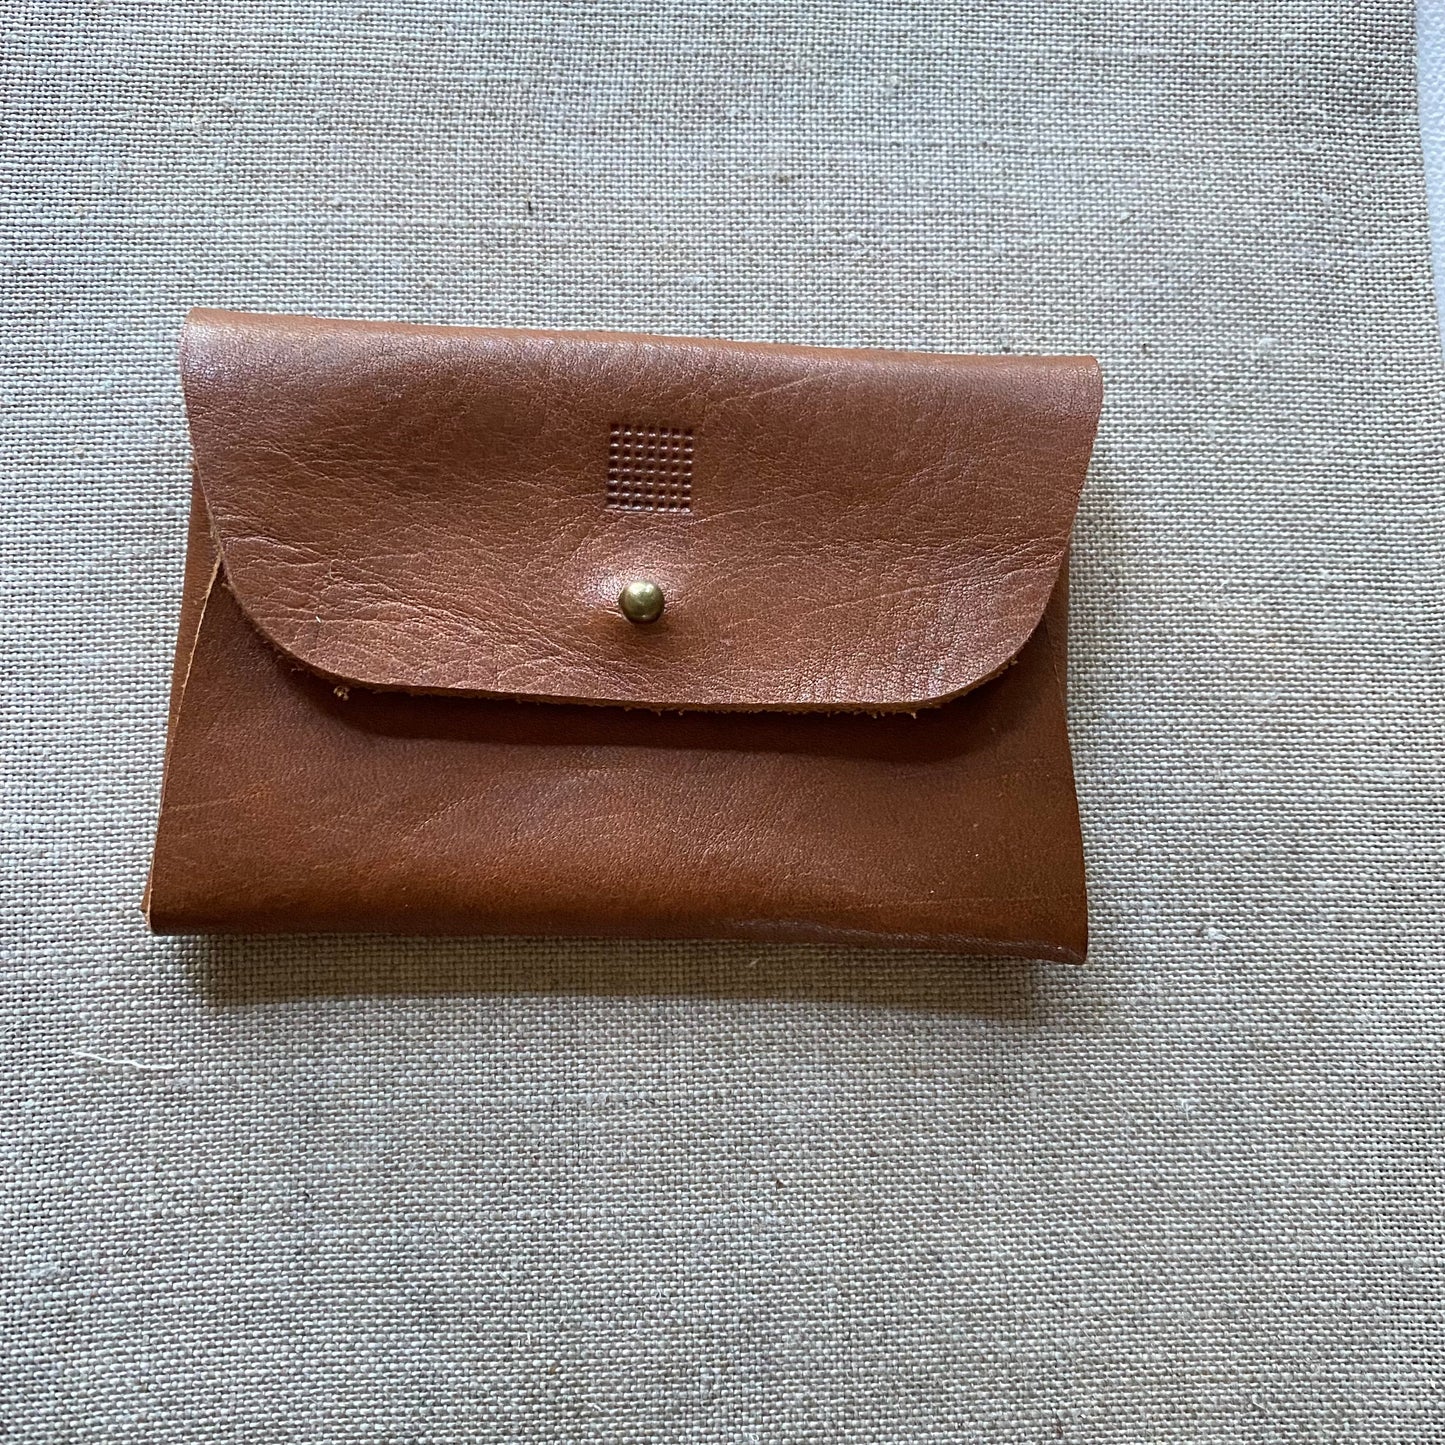 Leather single pocket Card wallet Black, Brown, brown suede, California, jewelry, Leather, unisex, wallet Chaio Leather Goods -Handbag & Wallet Accessories